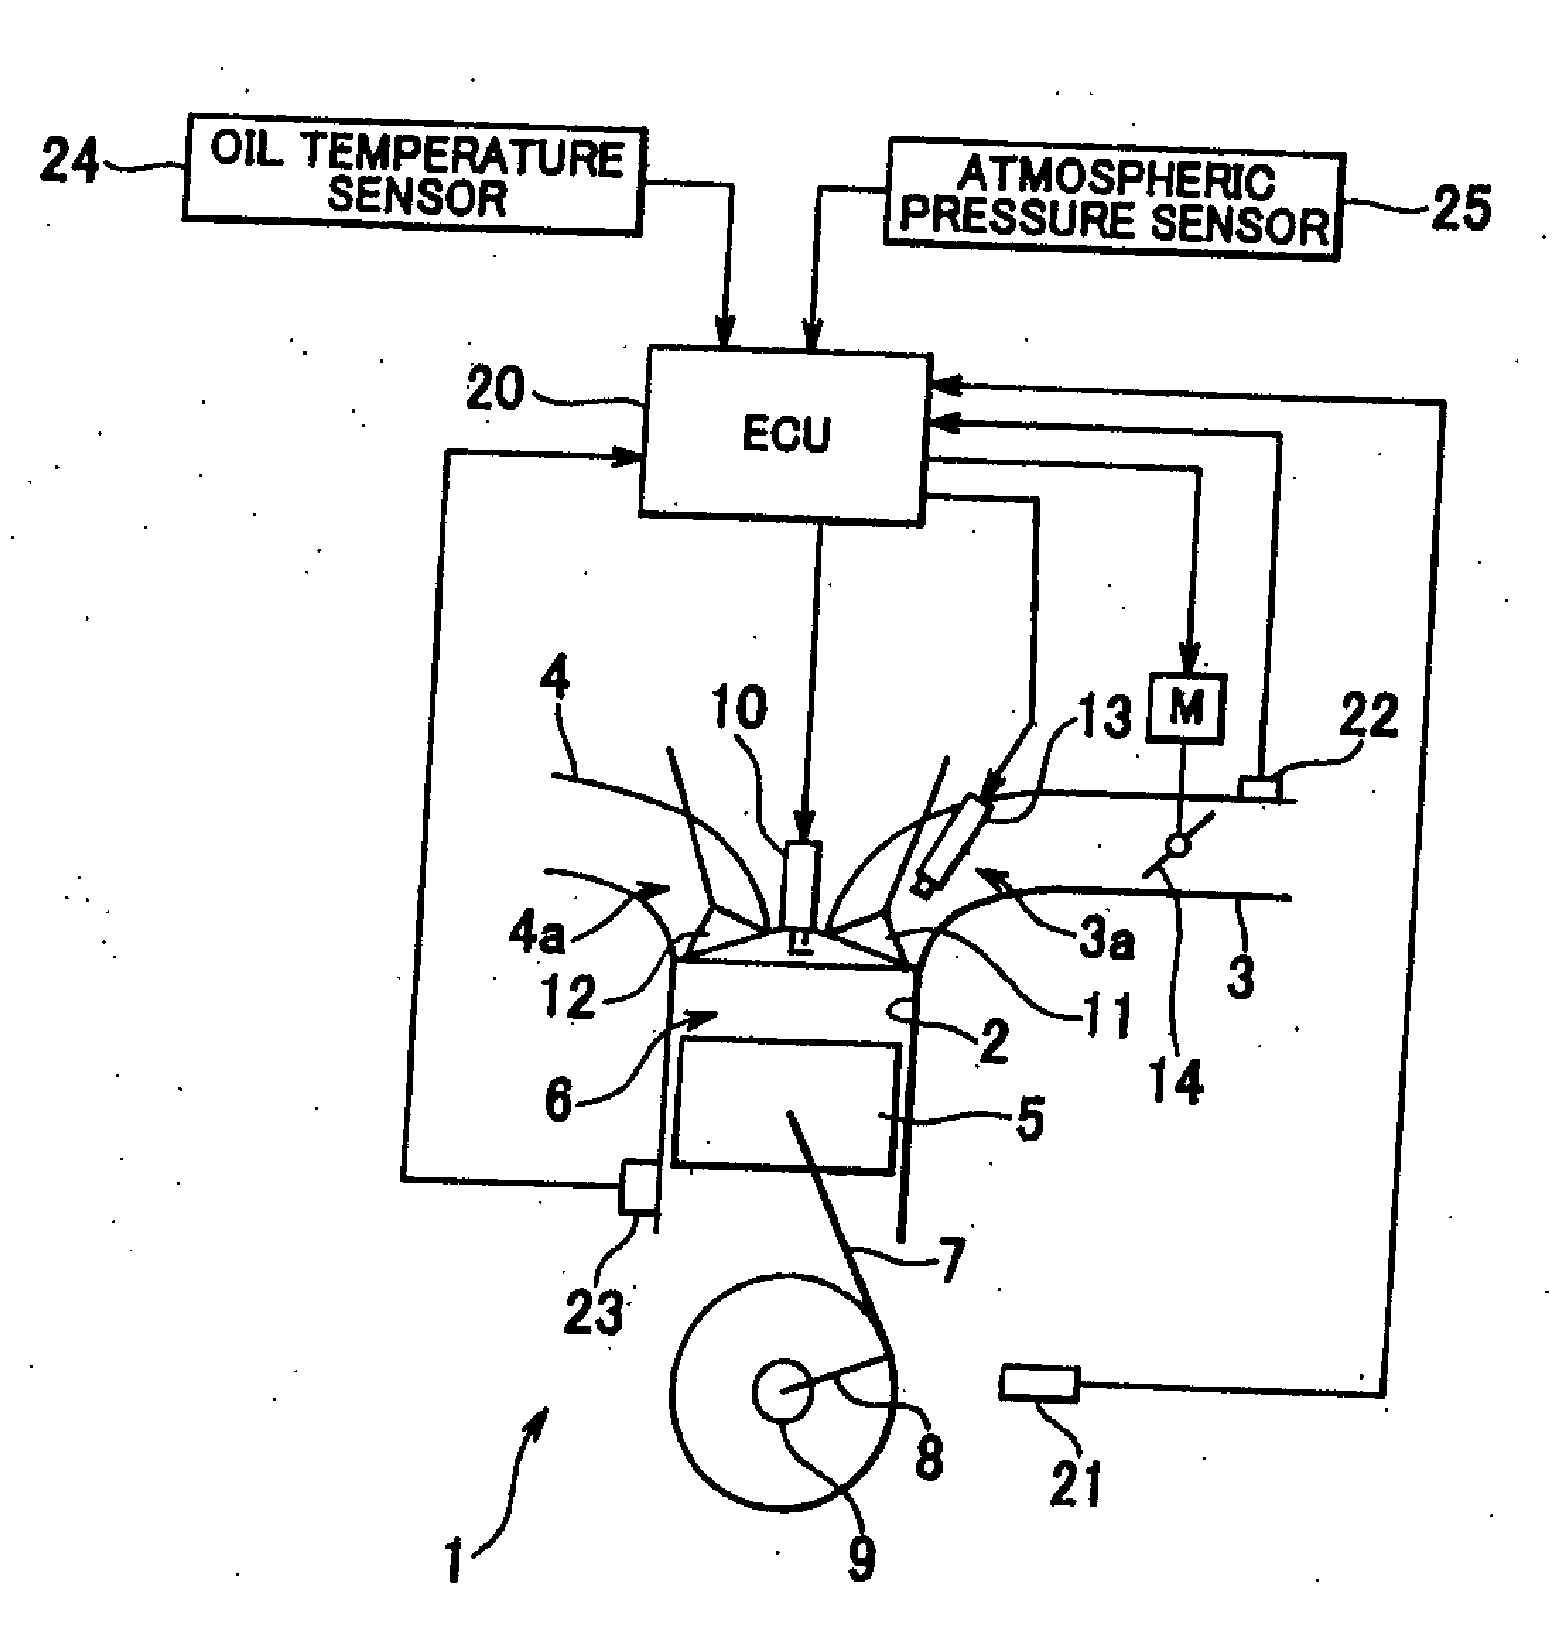 Stop-start control apparatus and method for an internal combustion engine